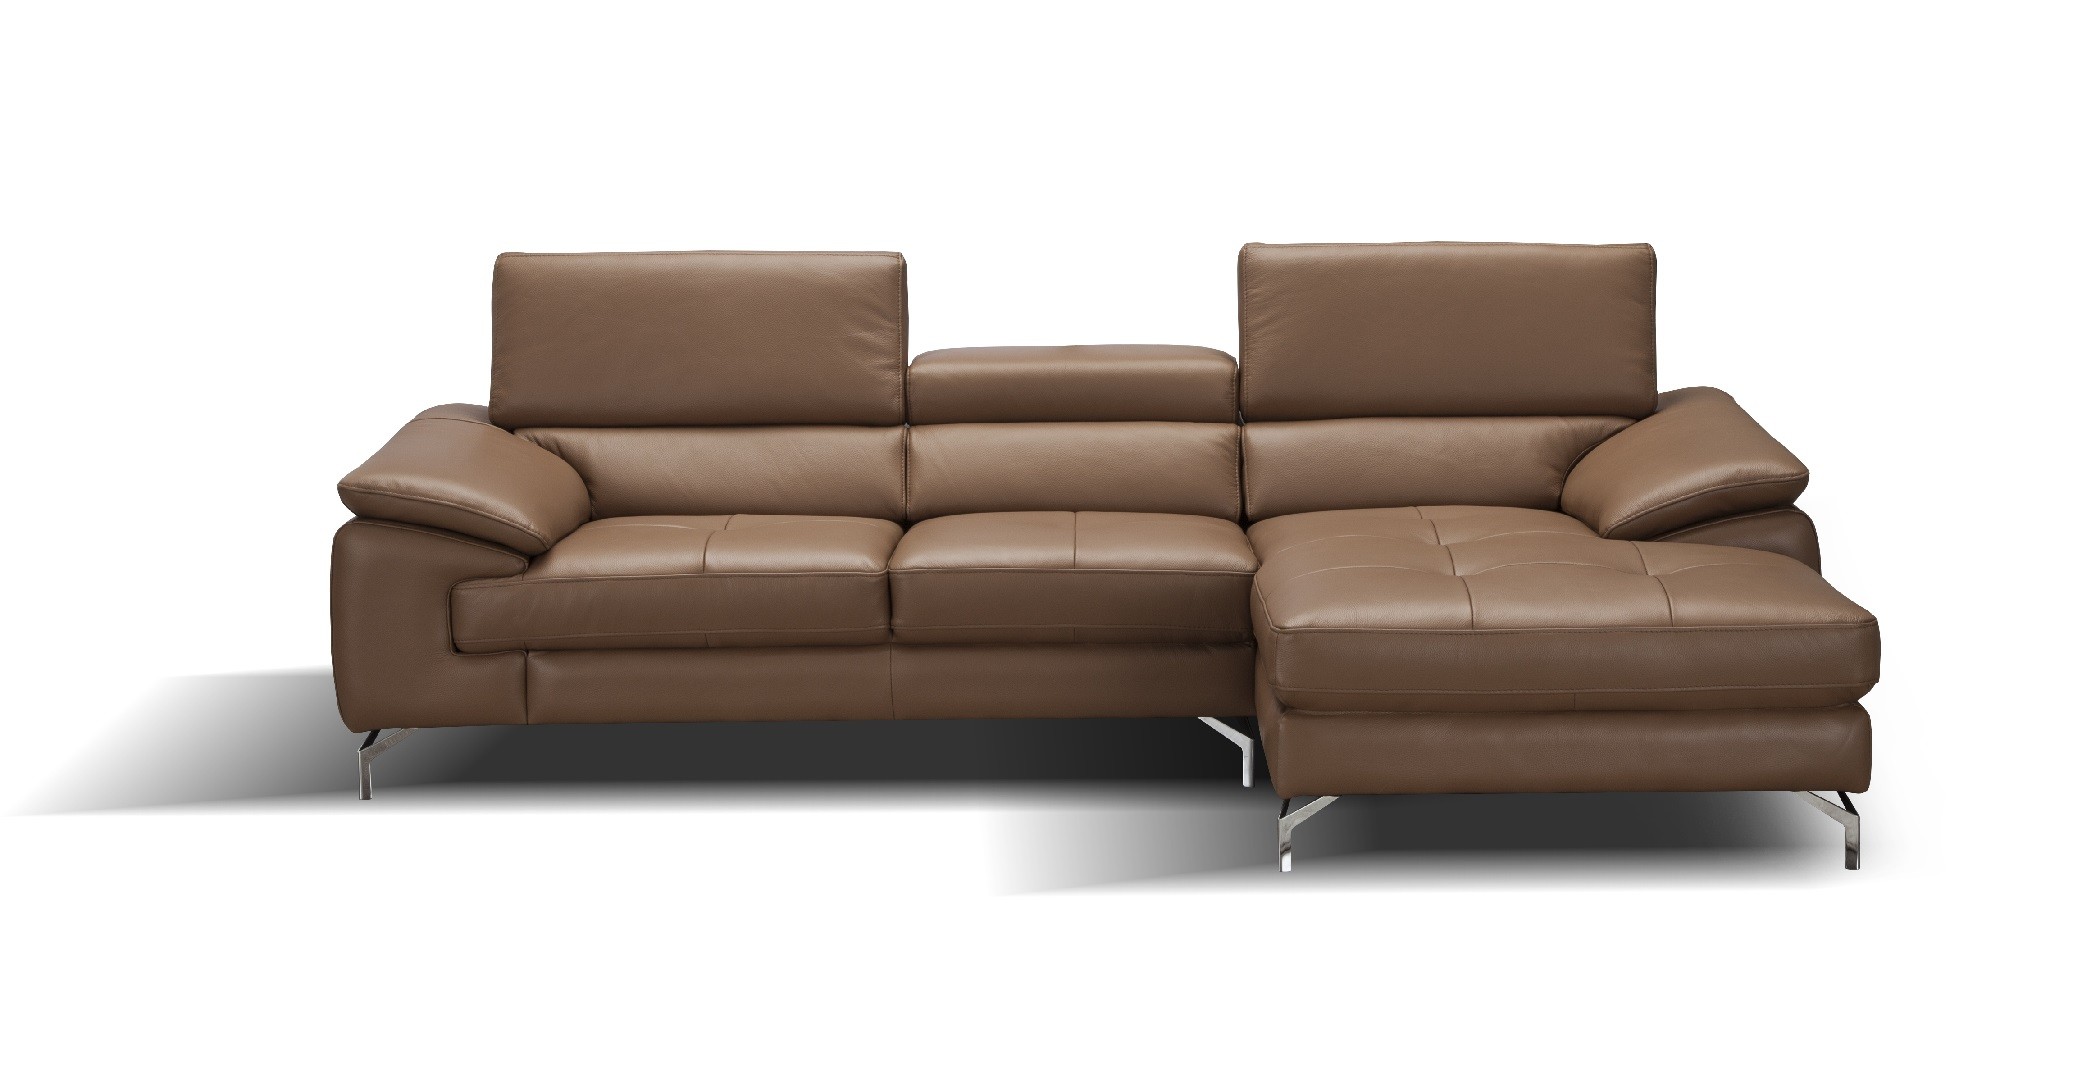 Overnice Quality Leather L-shape Sectional